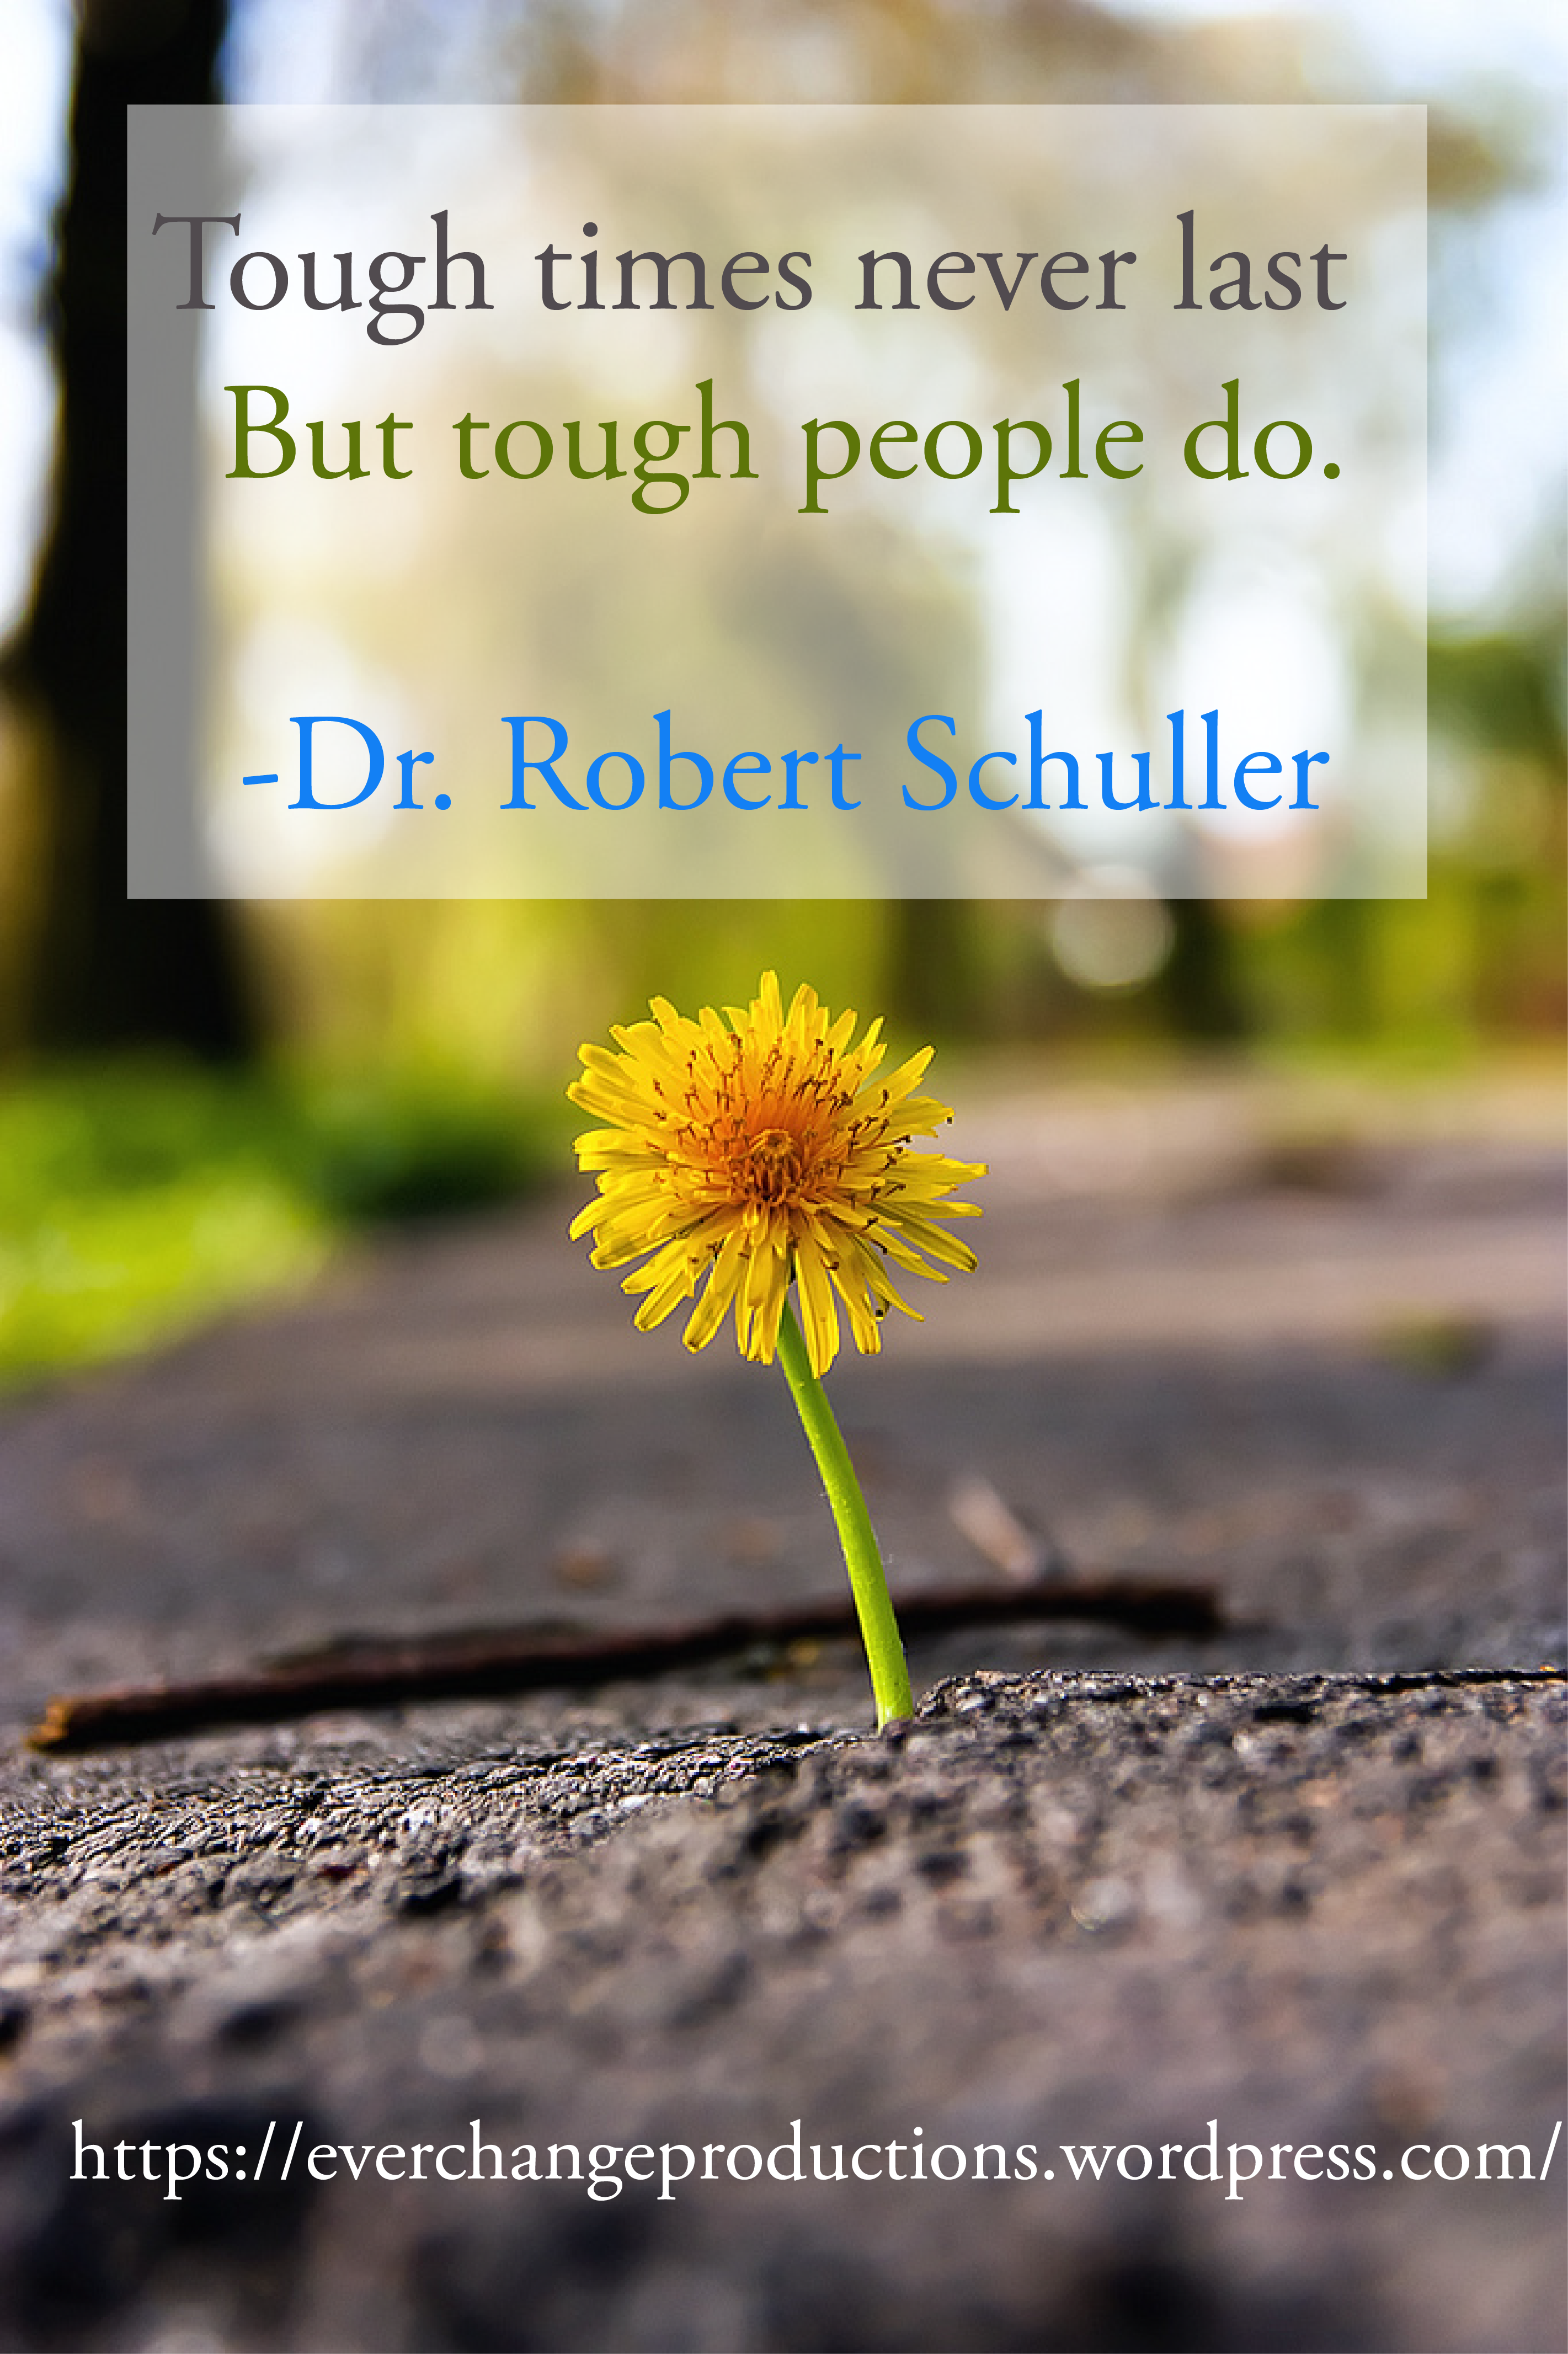 "Tough times never last, but tough people do."- Dr. Robert Schuller inspirational quote